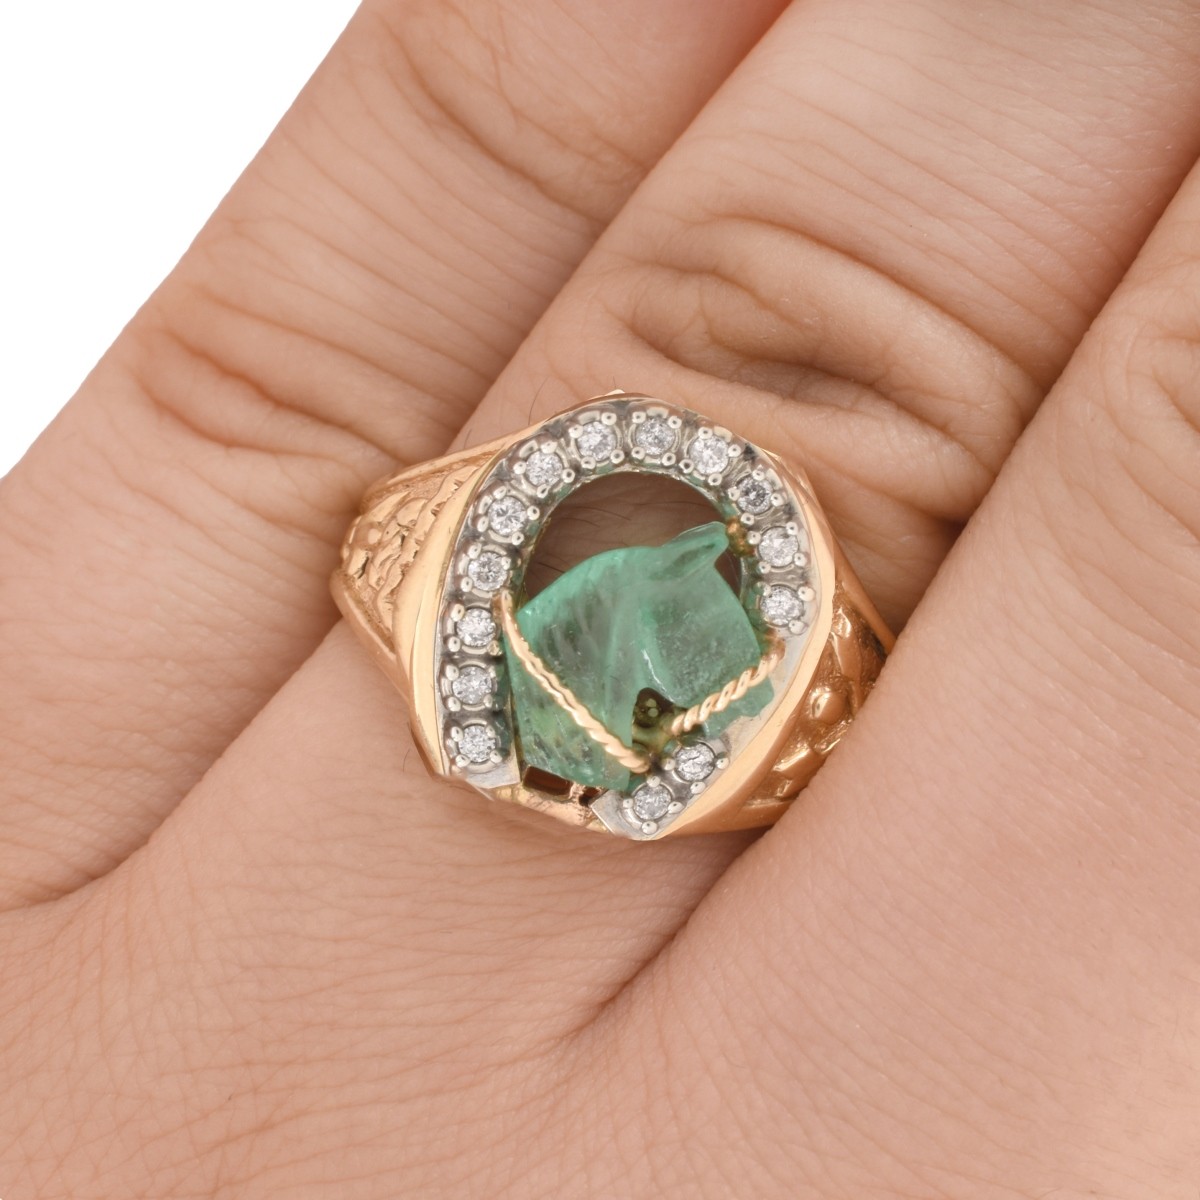 Carved Emerald, Diamond and 14K Ring - Image 7 of 7